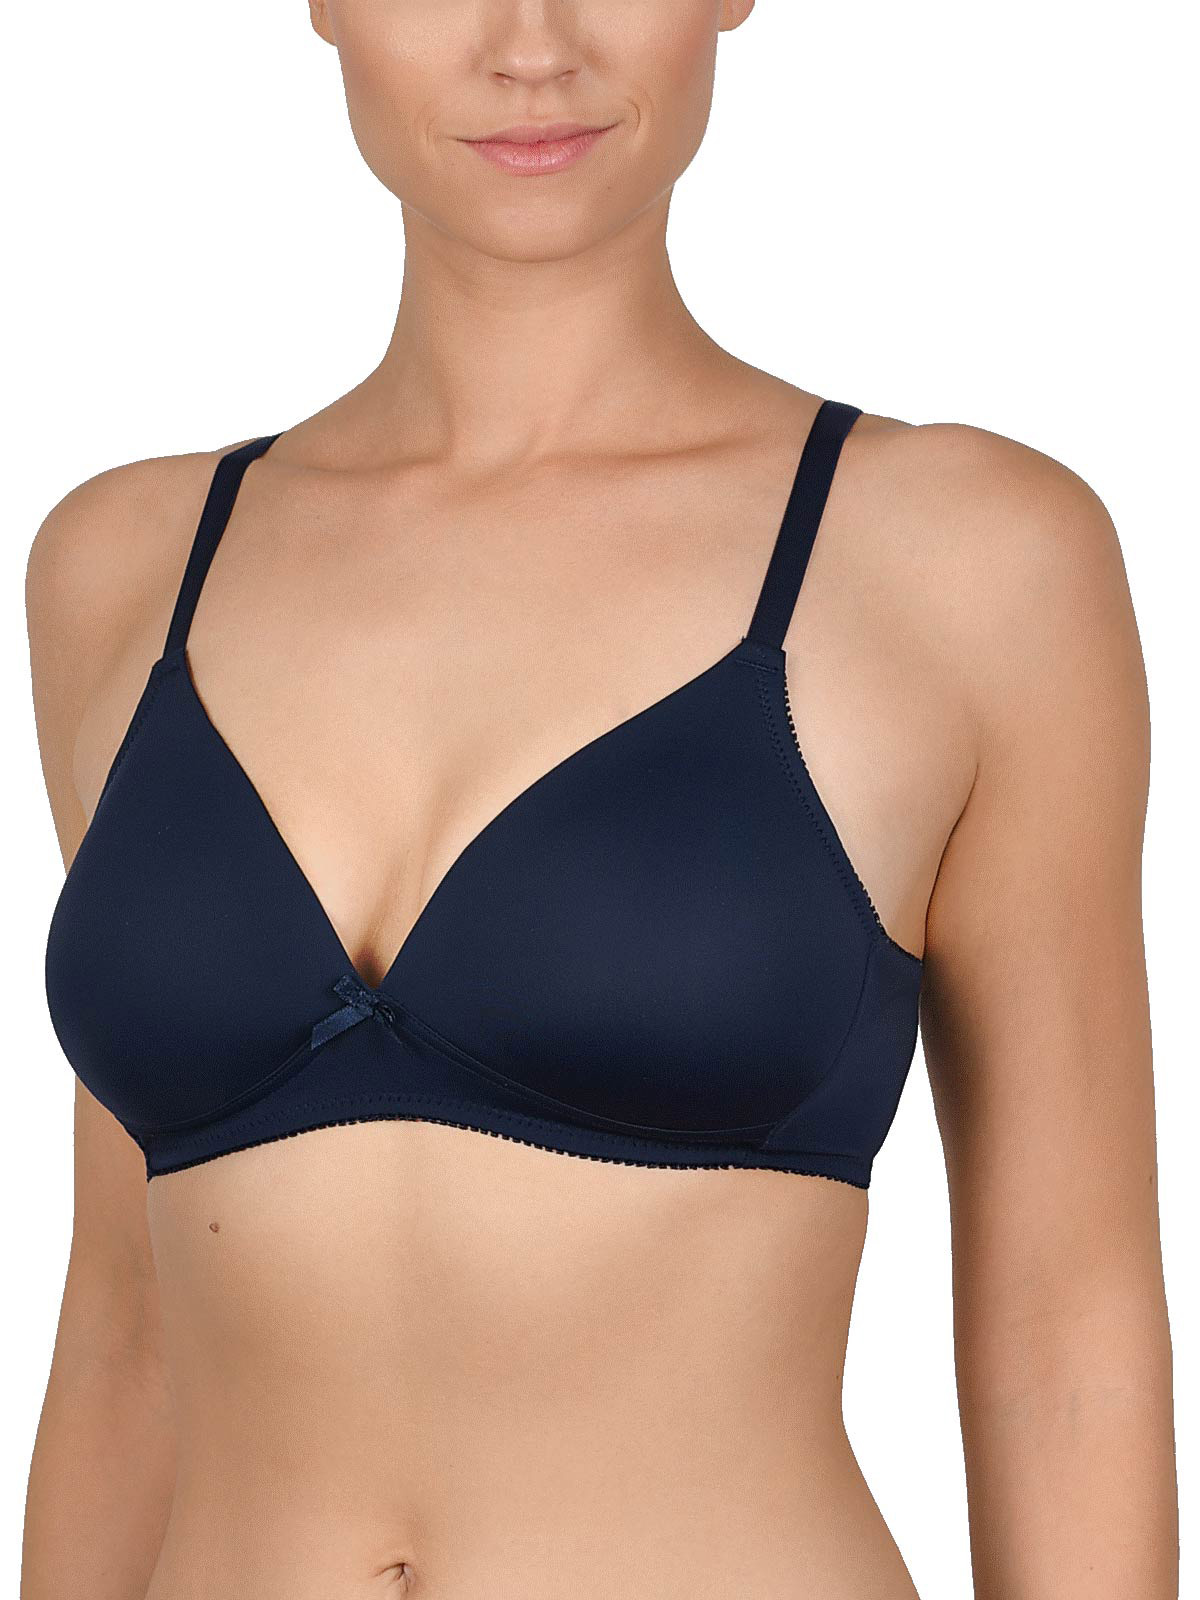  Naturana T Shirt Moulded Soft Cup Bra 5166 Raindrops (Blue) 34A  : Clothing, Shoes & Jewelry